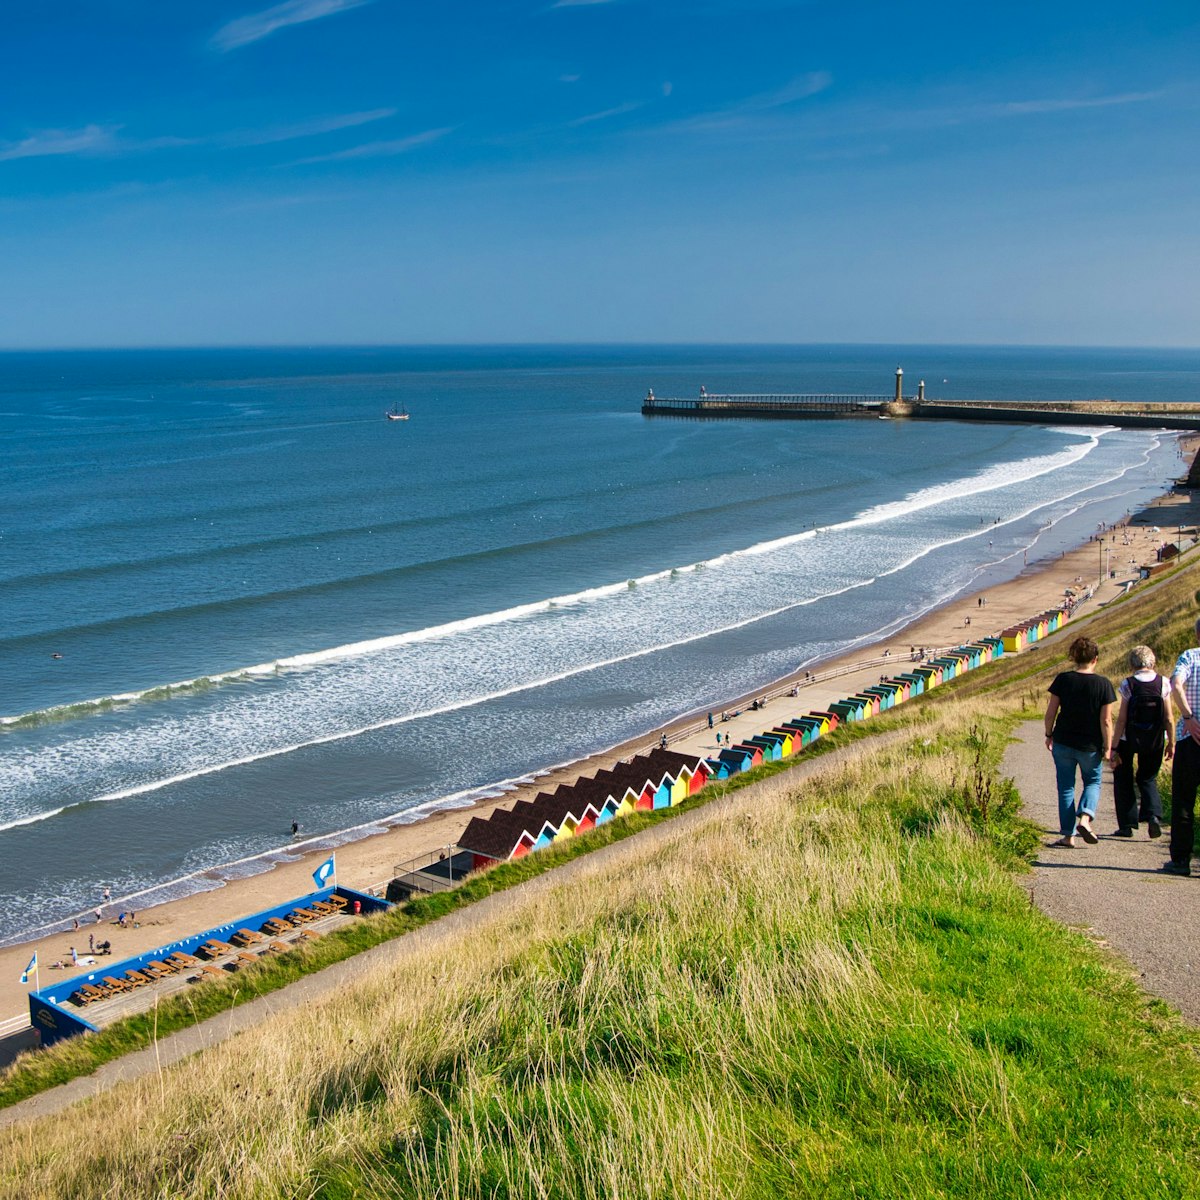 Tourists on a path overlooking colourful beach huts, the coast and harbour piers at Whitby, North Yorkshire, UK - taken on a sunny day at the end of summer